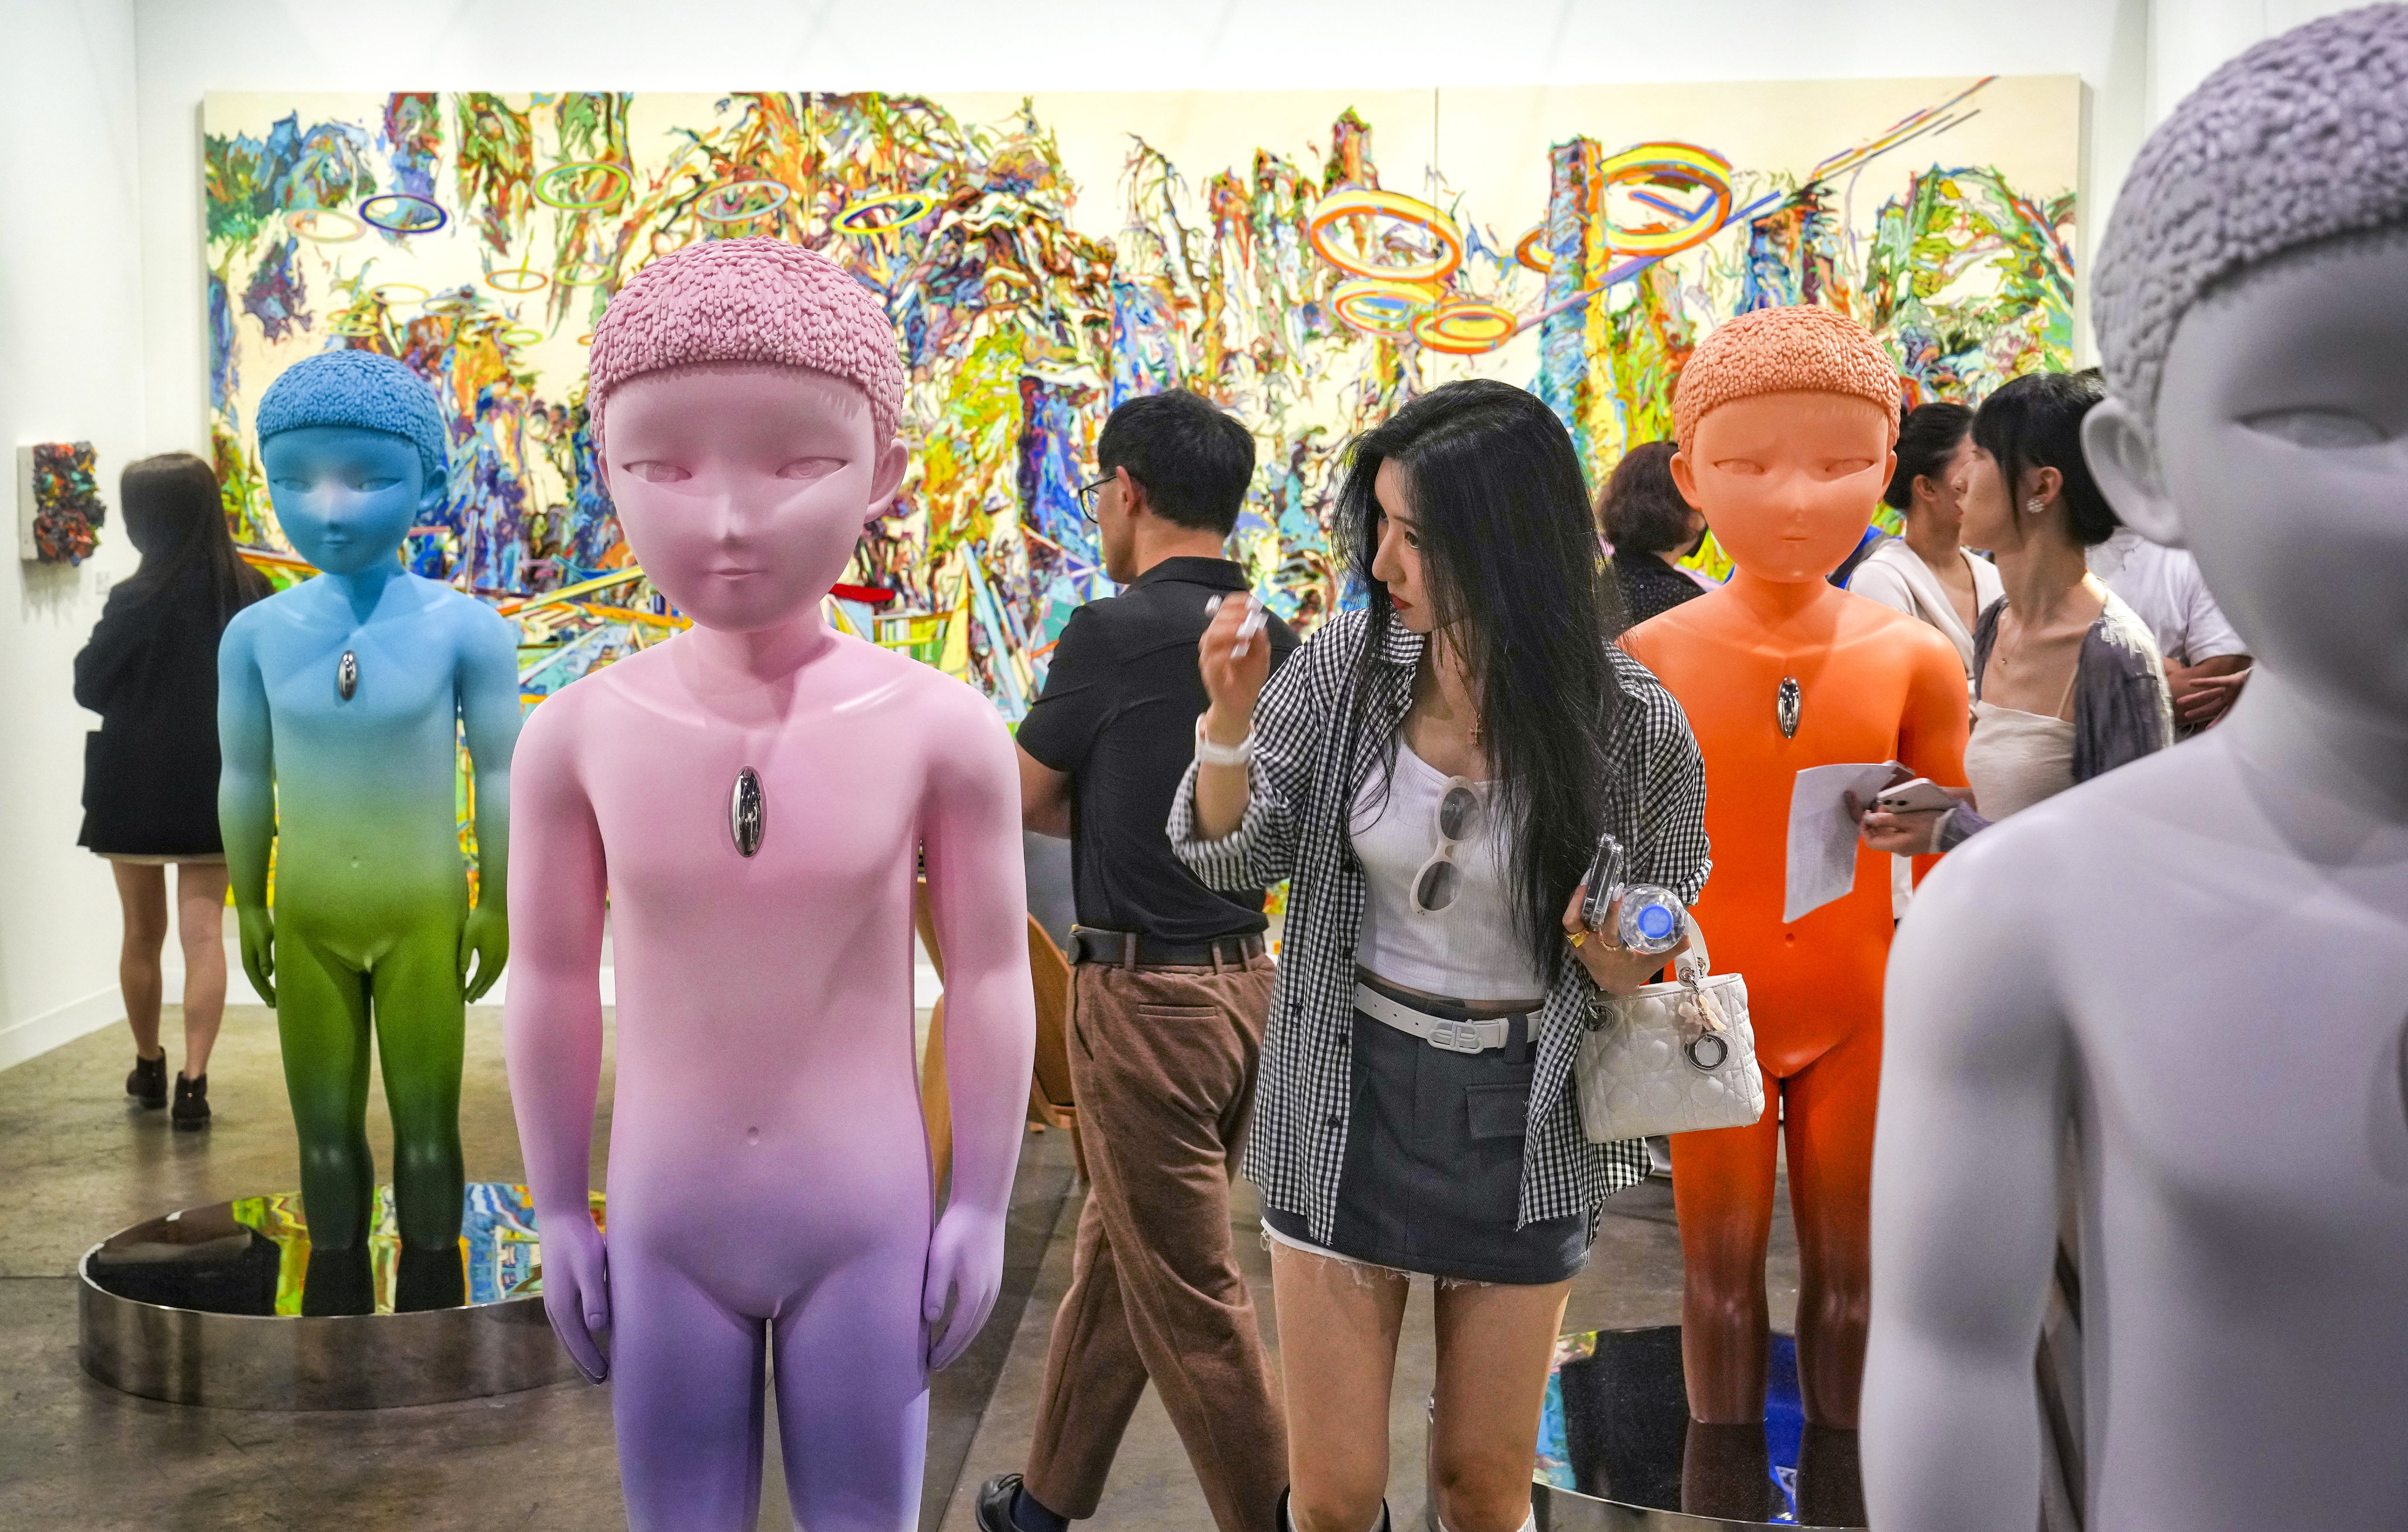 Art Basel Hong Kong shaping up to be biggest in years, with 242 exhibitors signed up | South China Morning Post